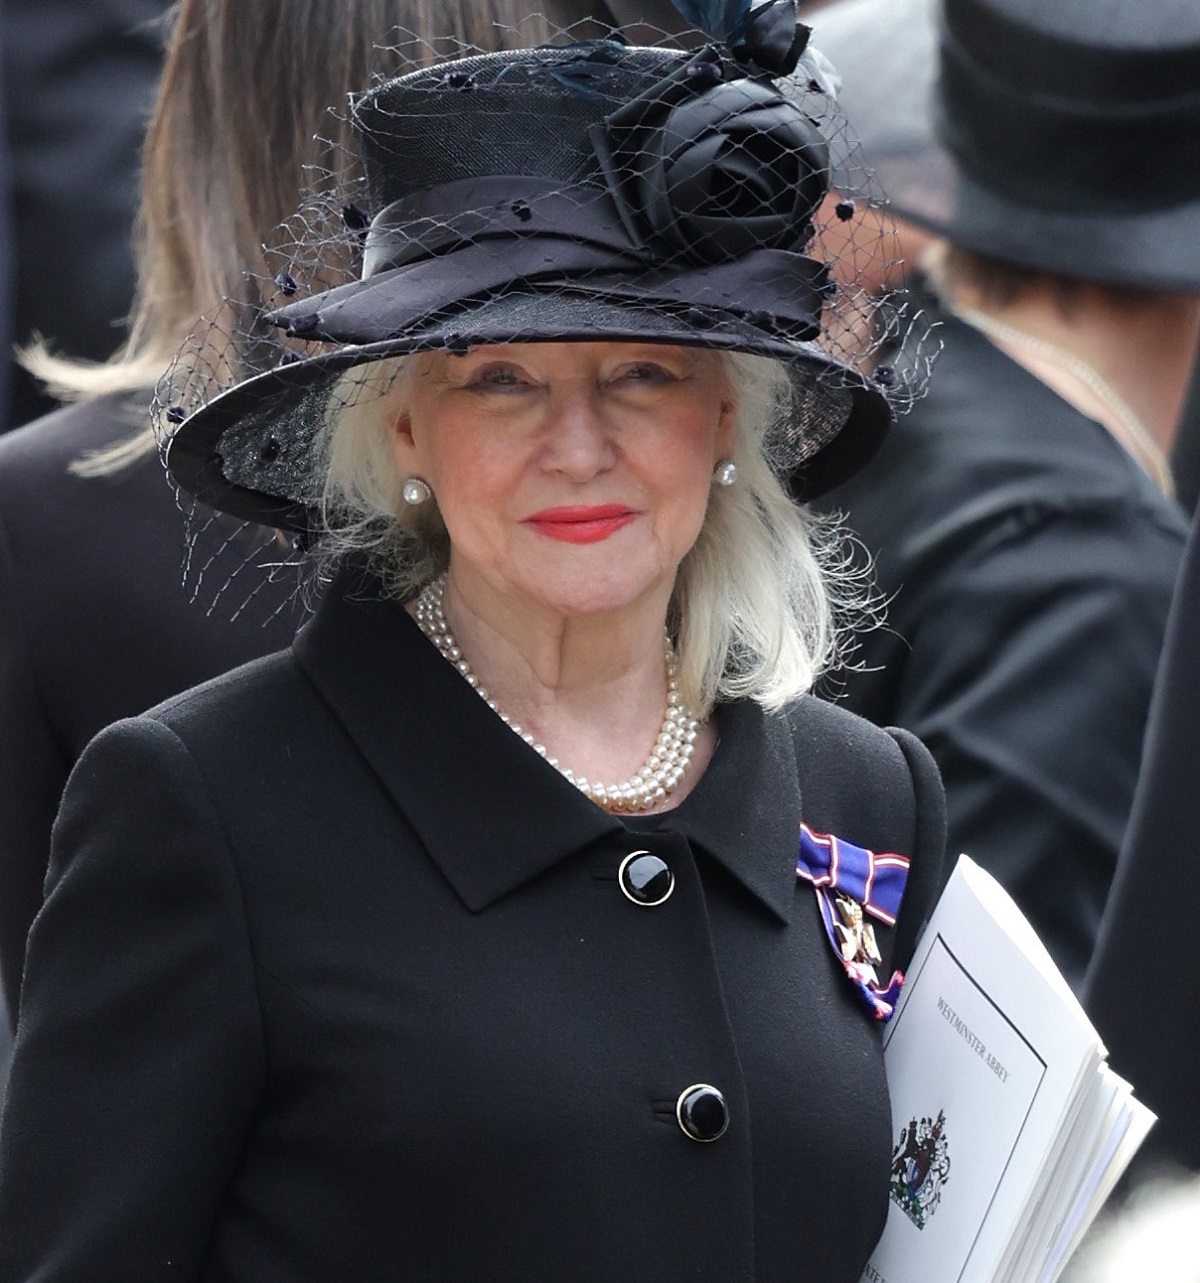 Angela Kelly is seen during the state funeral of Queen Elizabeth II at Westminster Abbey